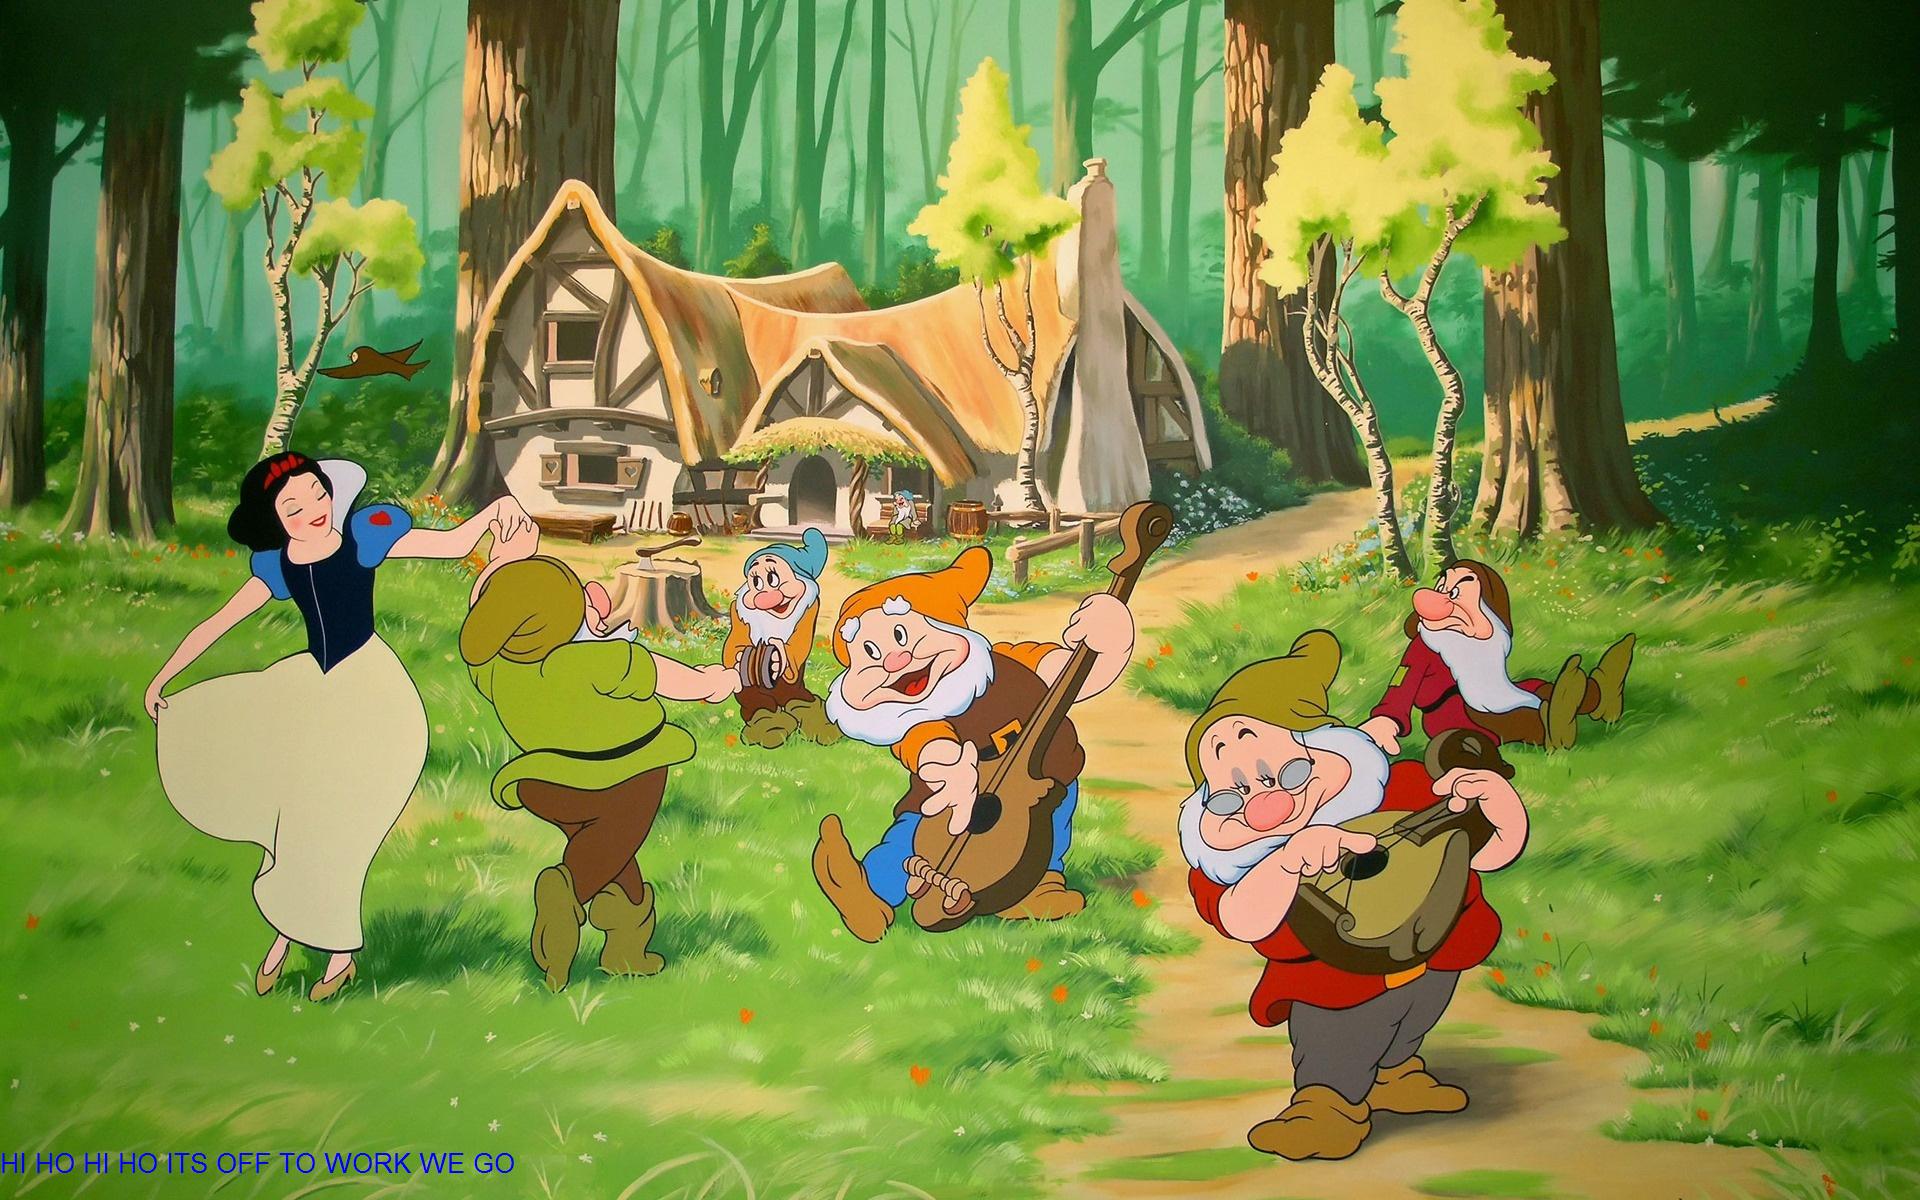 Desktop wallpaper featuring Snow White and the Seven Dwarfs in a cartoon style.